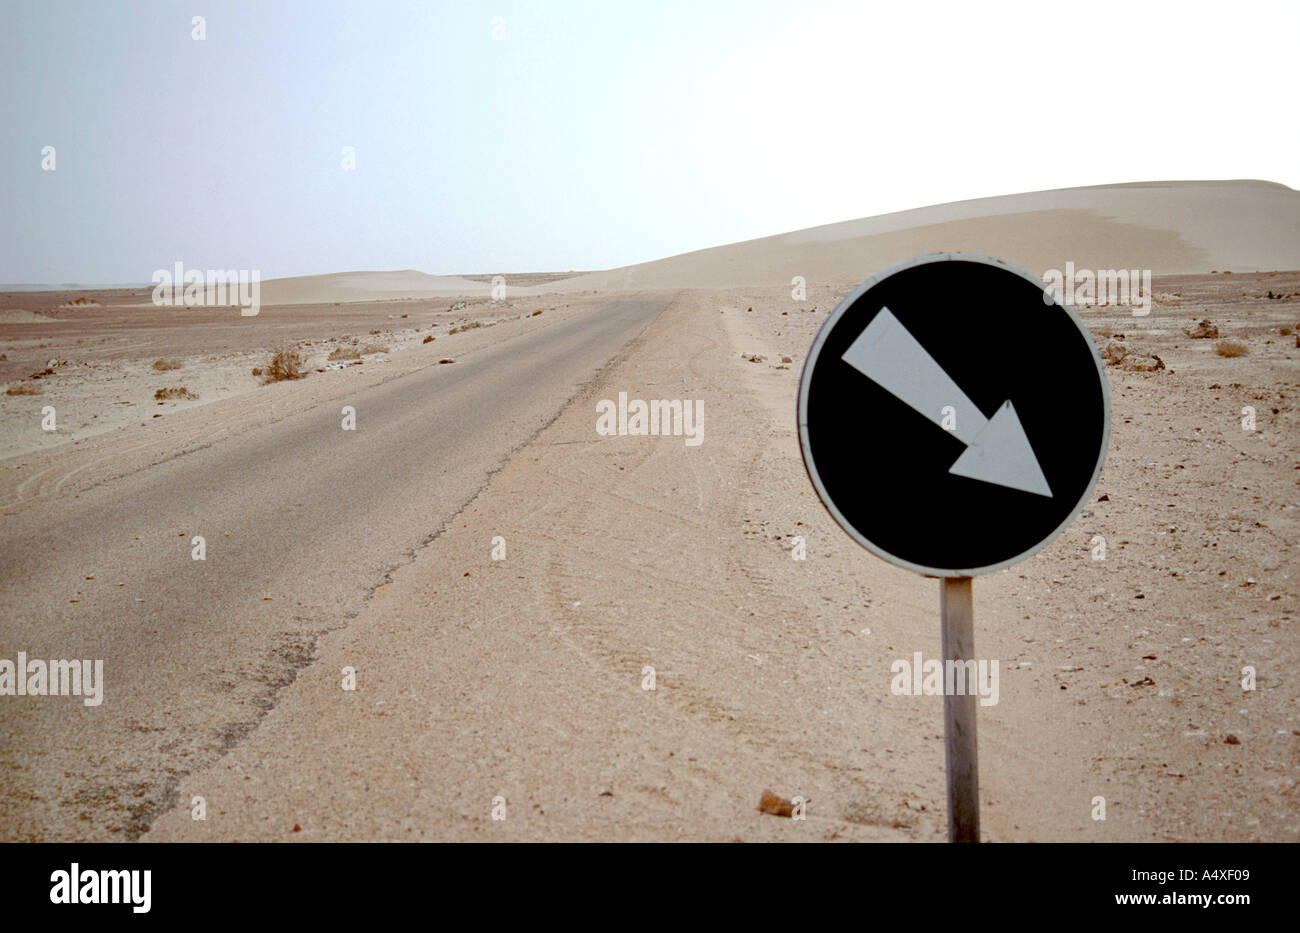 A sand dune that has covered the road in Morocco, necessitating a permanent detour. Stock Photo